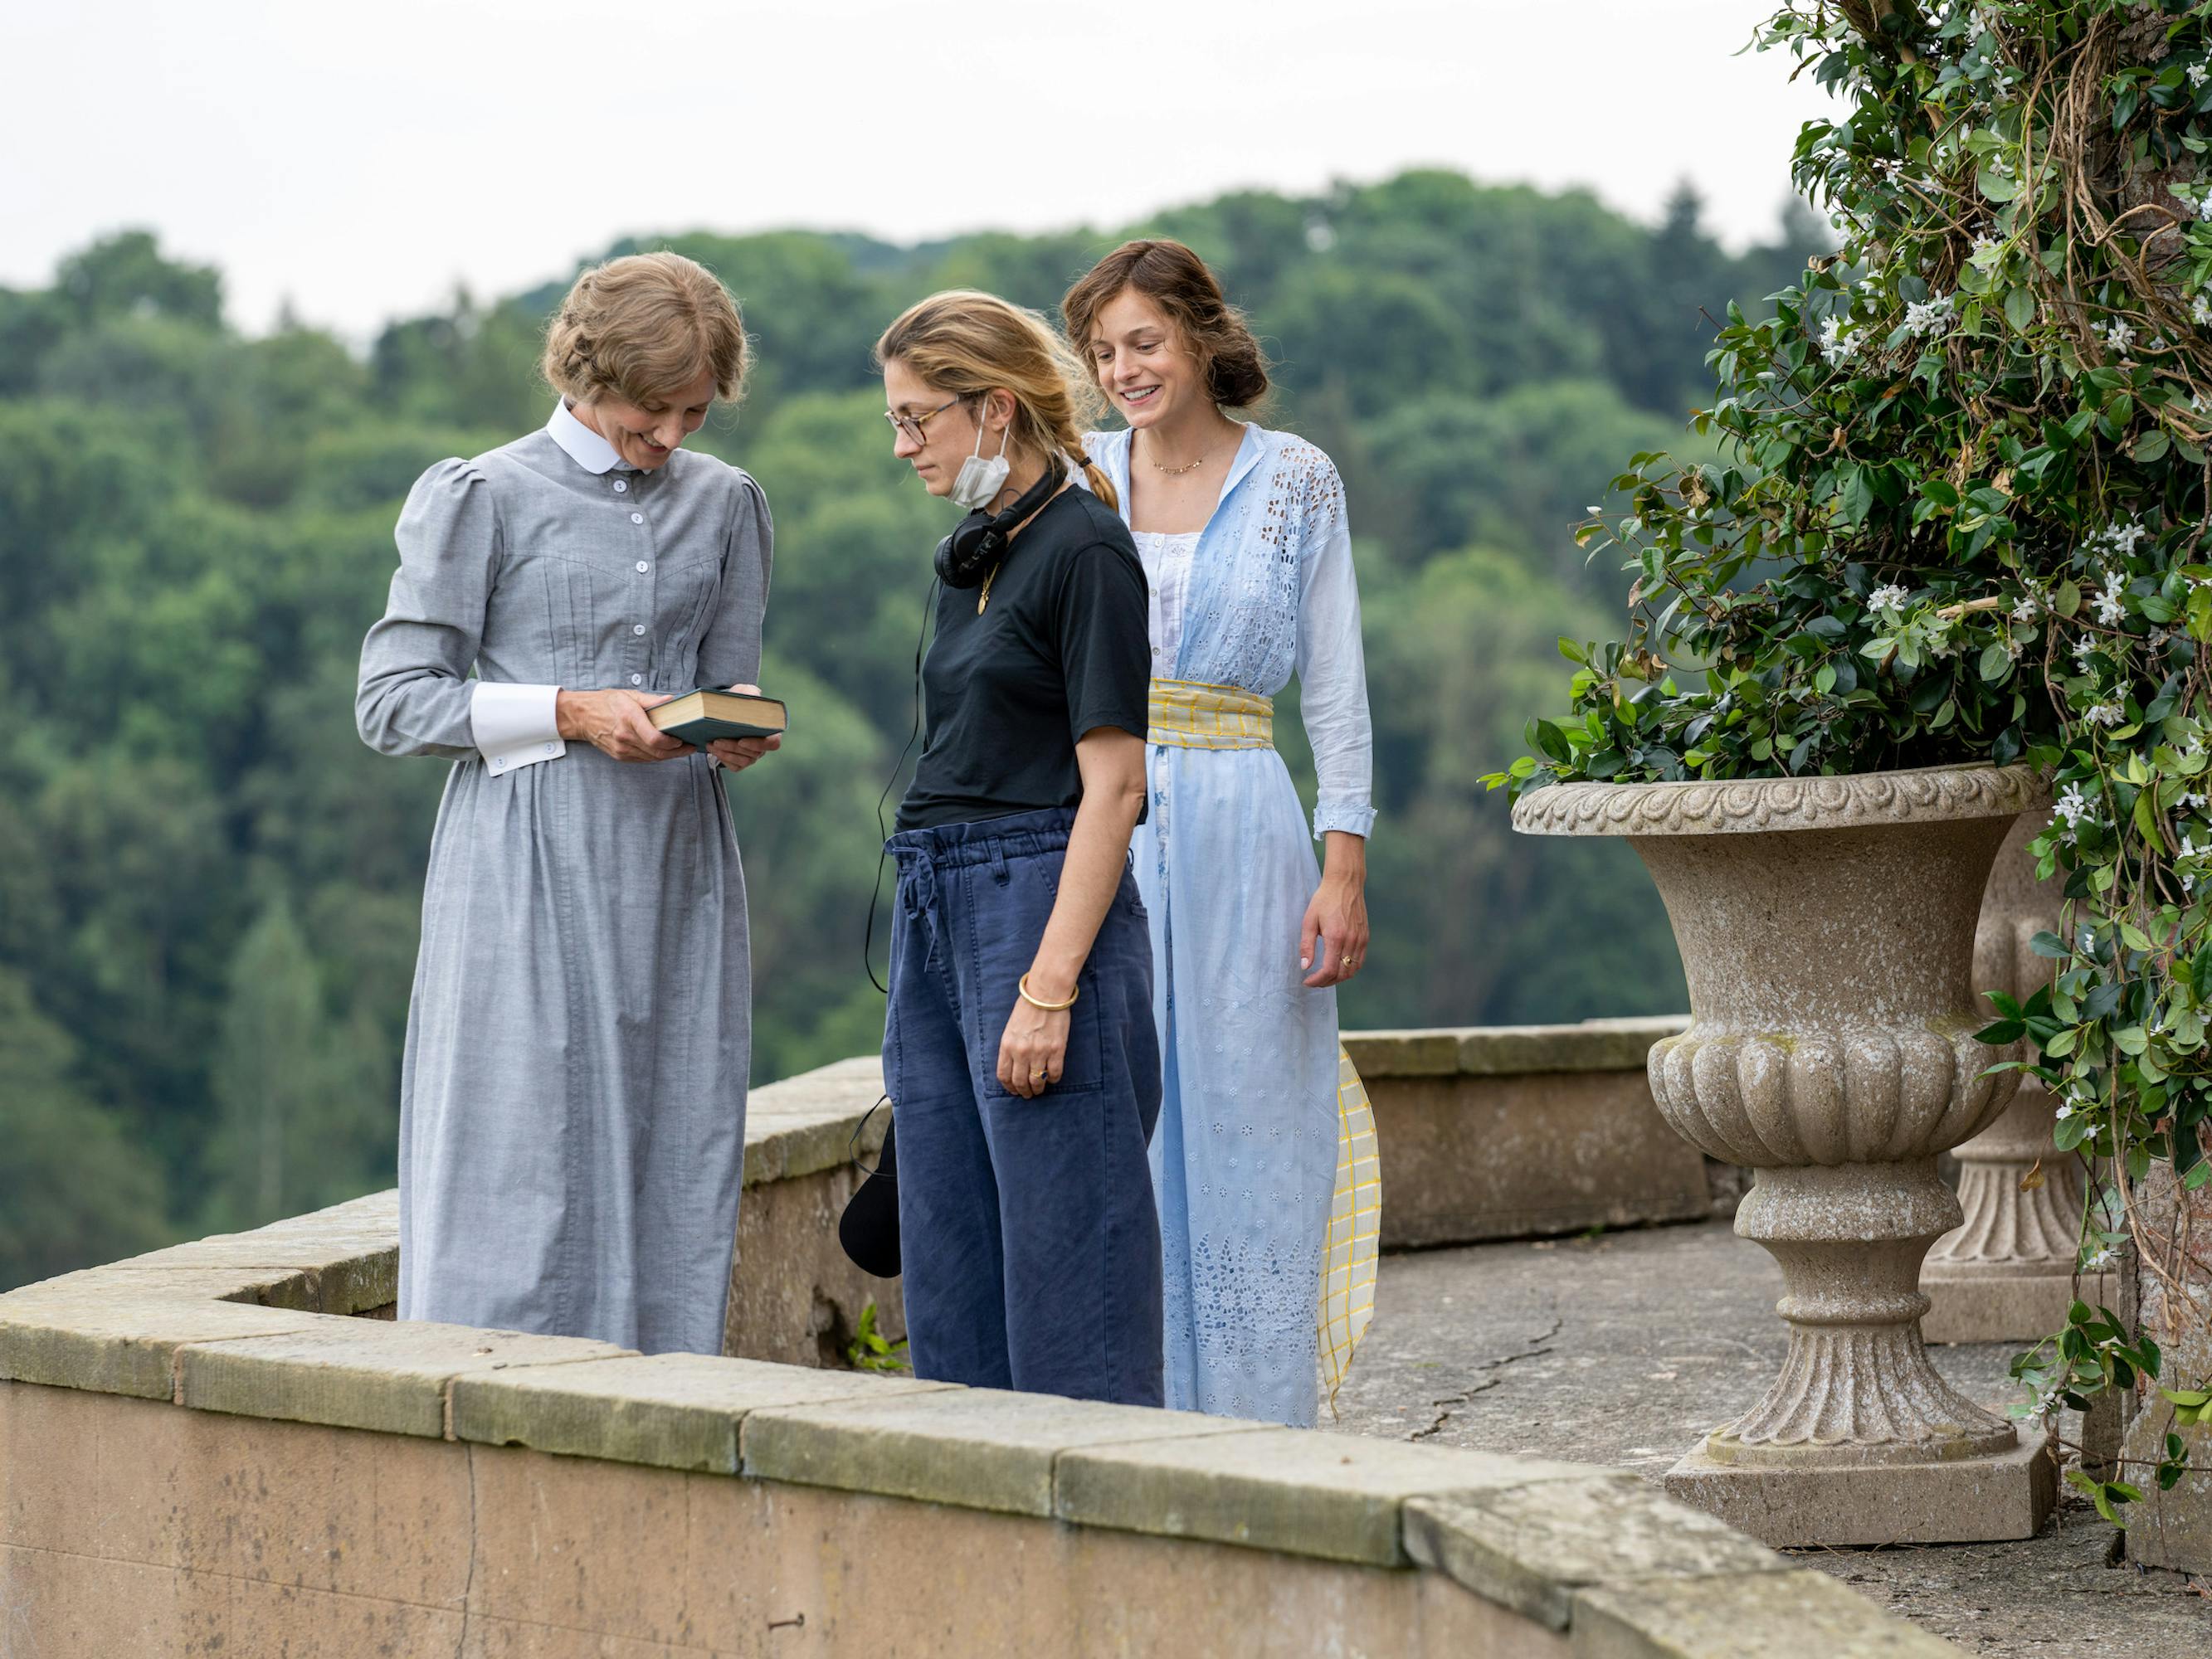 Mrs. Bolton (Joely Richardson), Laure de Clermont-Tonnerre, and Connie (Emma Corrin) wear various shades of blue and stand on a porch against a forest backdrop.